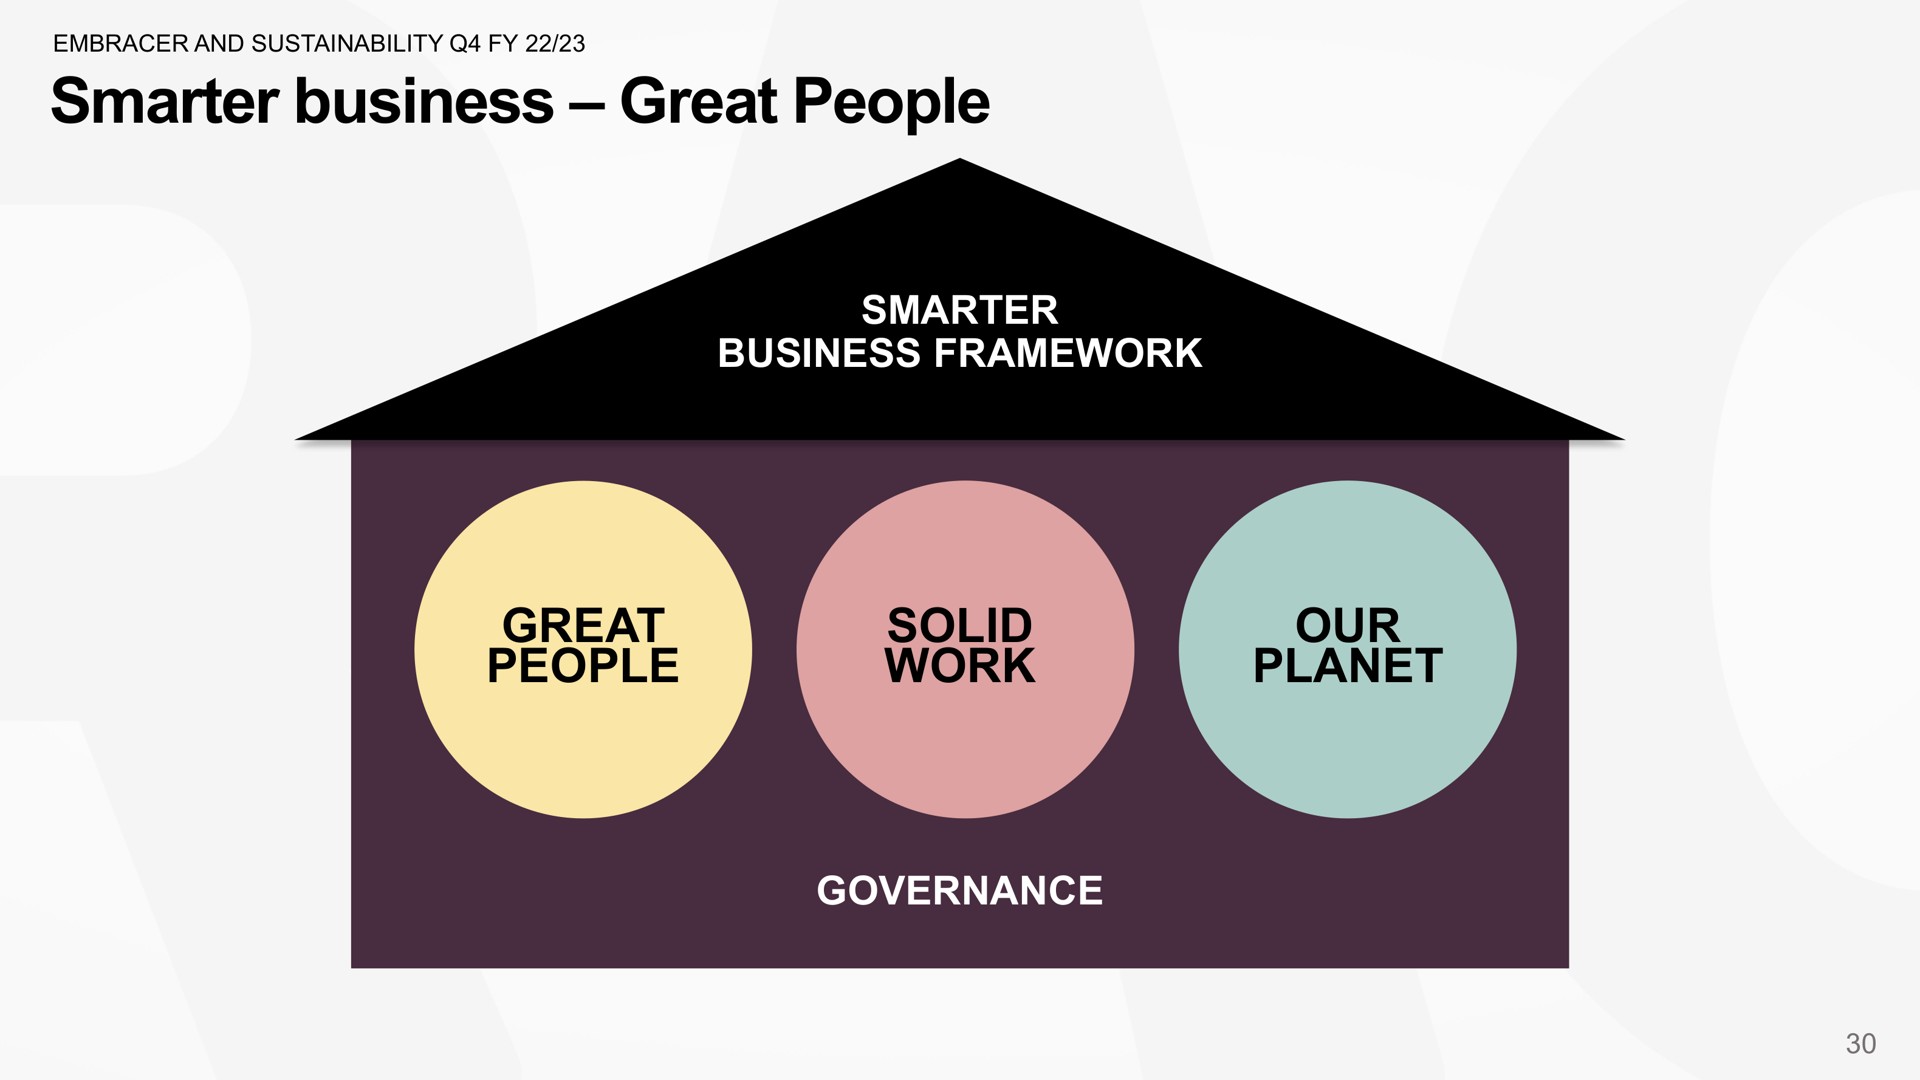 business great people business framework great people solid work our planet governance | Embracer Group